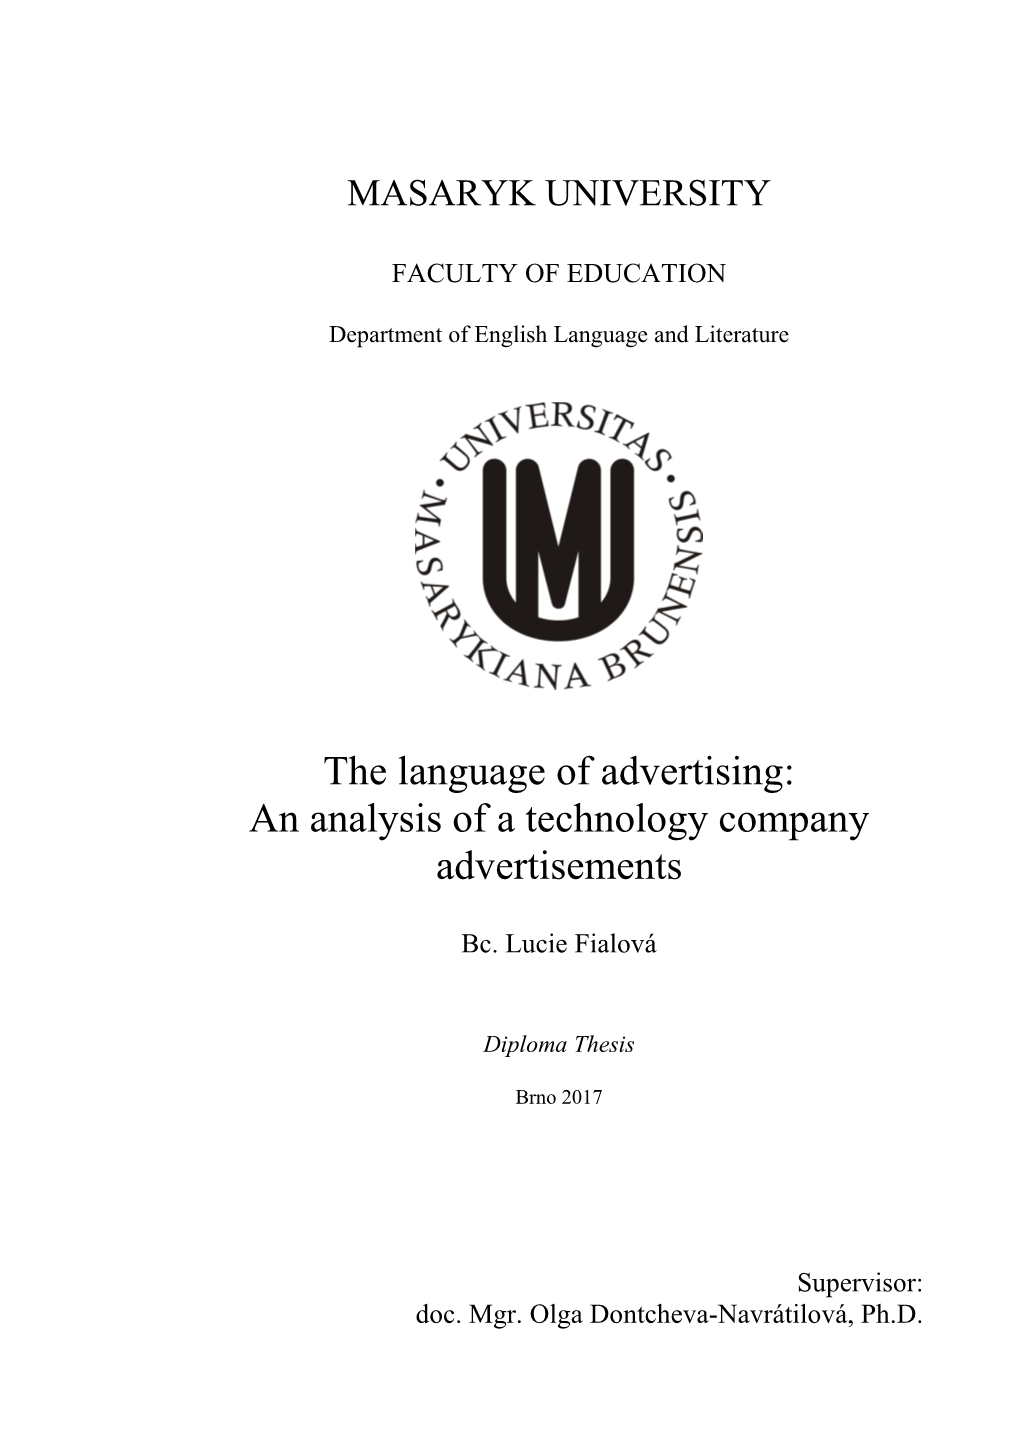 The Language of Advertising: an Analysis of a Technology Company Advertisements